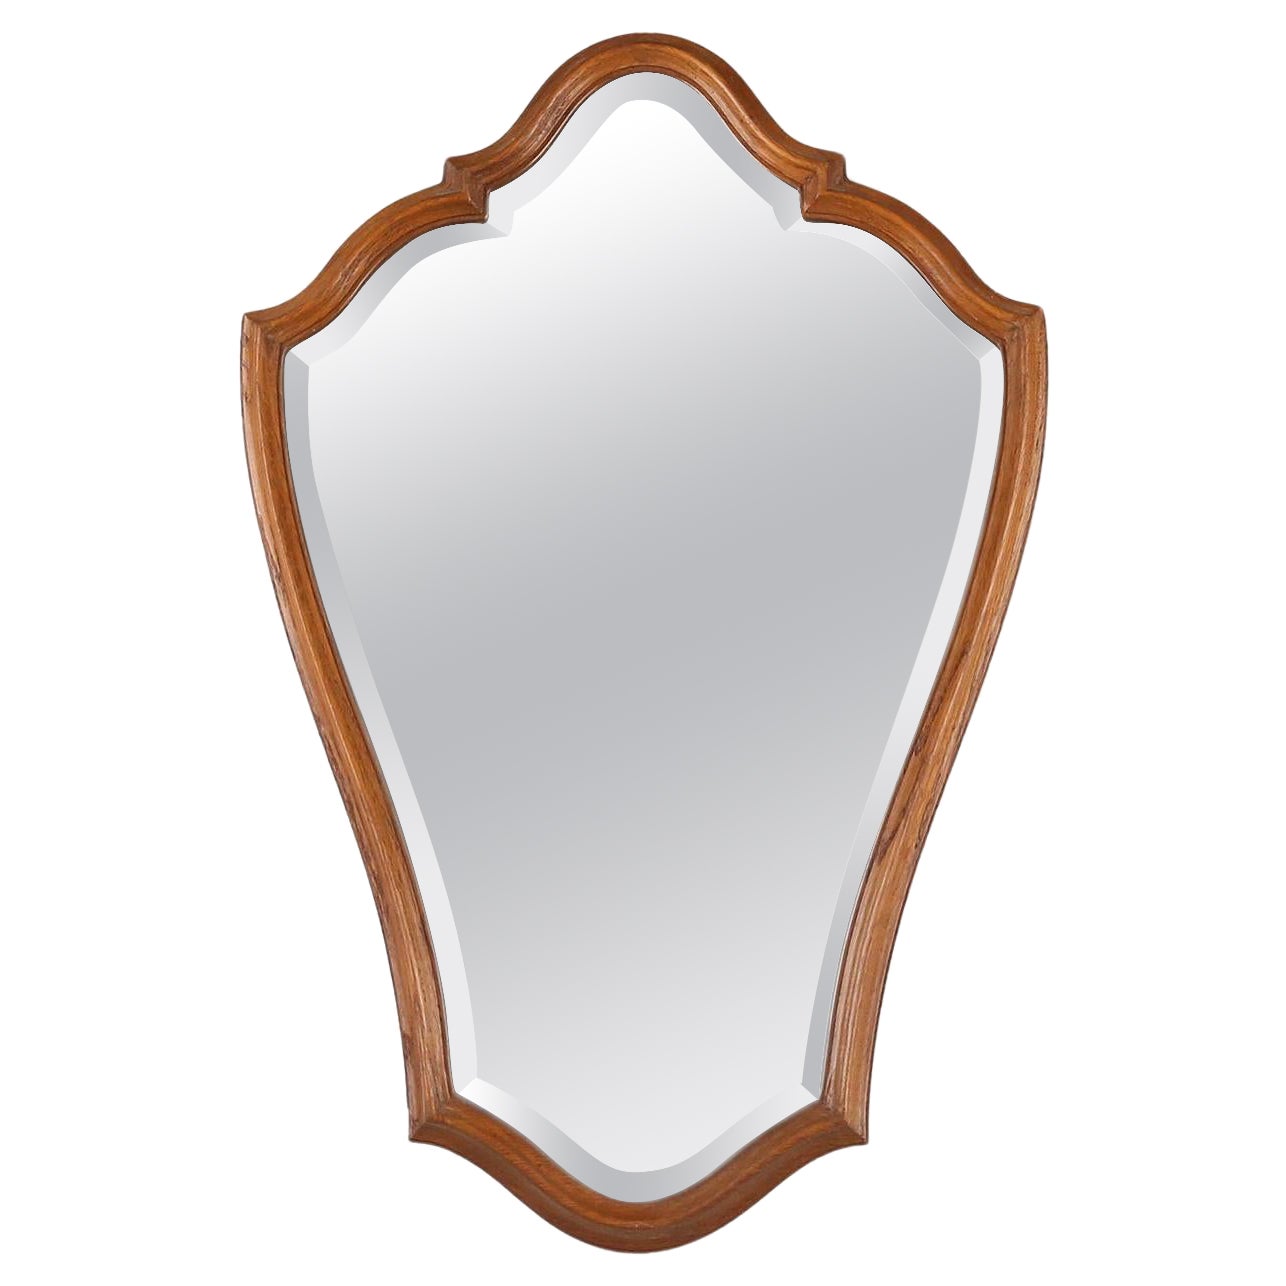 French carved wooden mirror with elegant lined frame, 1950s